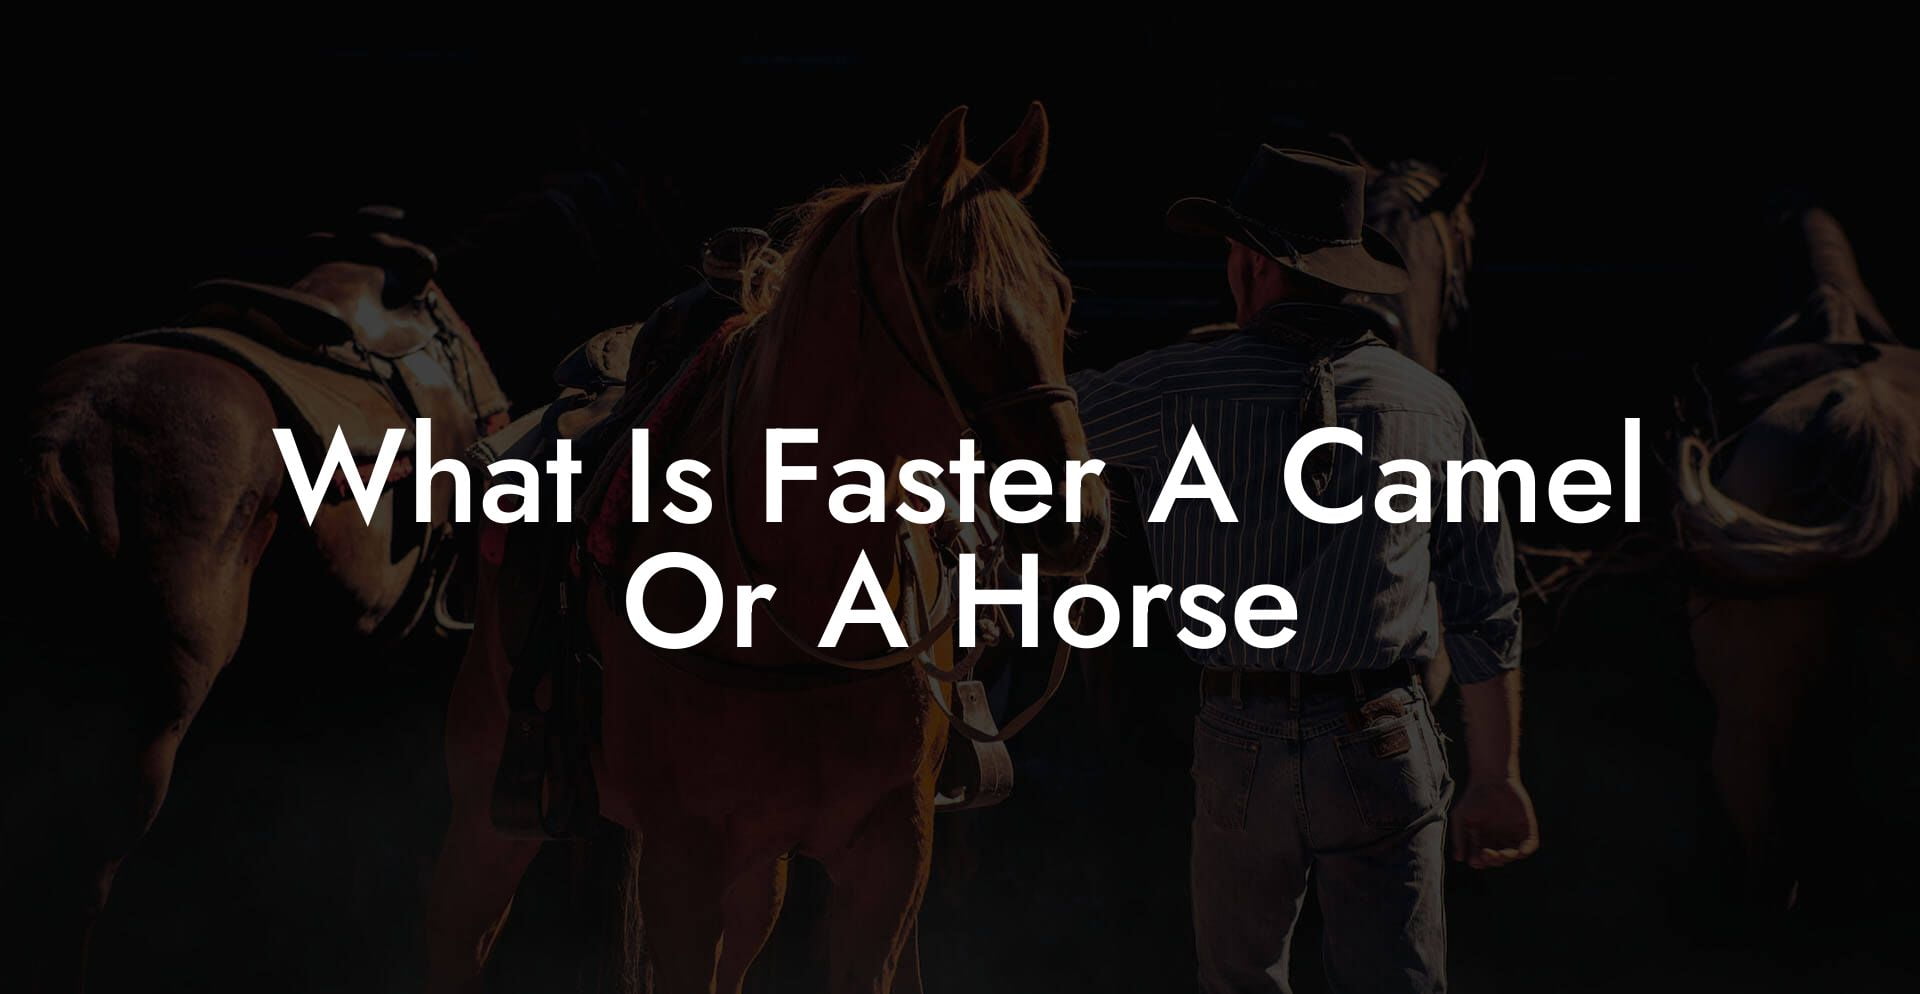 What Is Faster A Camel Or A Horse